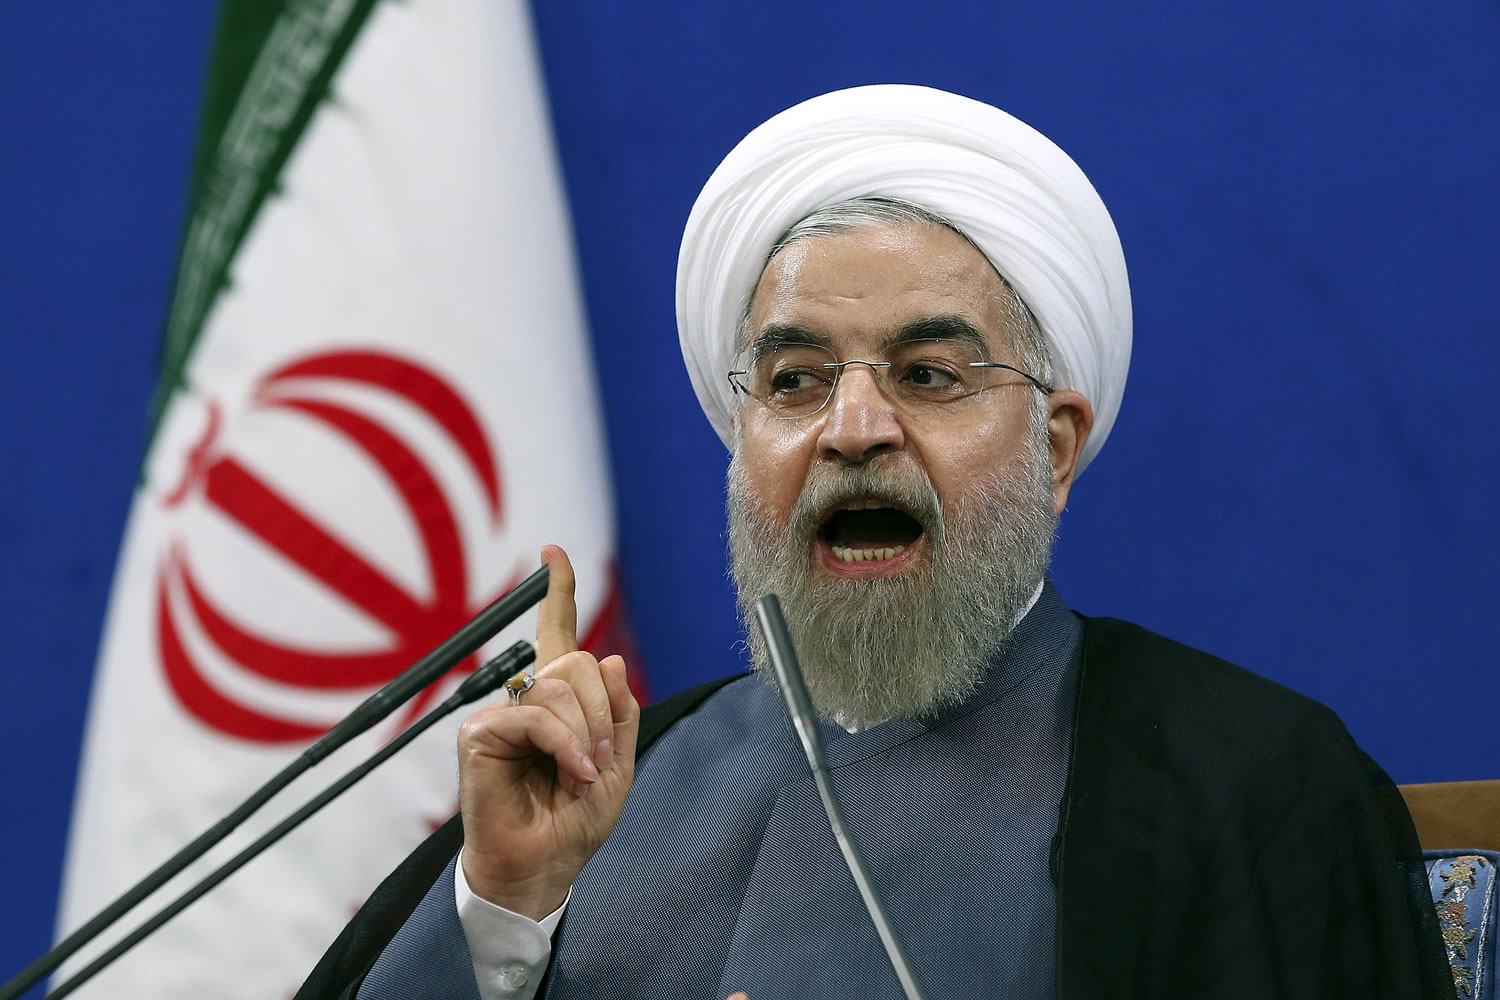 Iranian President Hassan Rouhani speaks during a press conference on the second anniversary of his election, in Tehran, Iran, Saturday,.